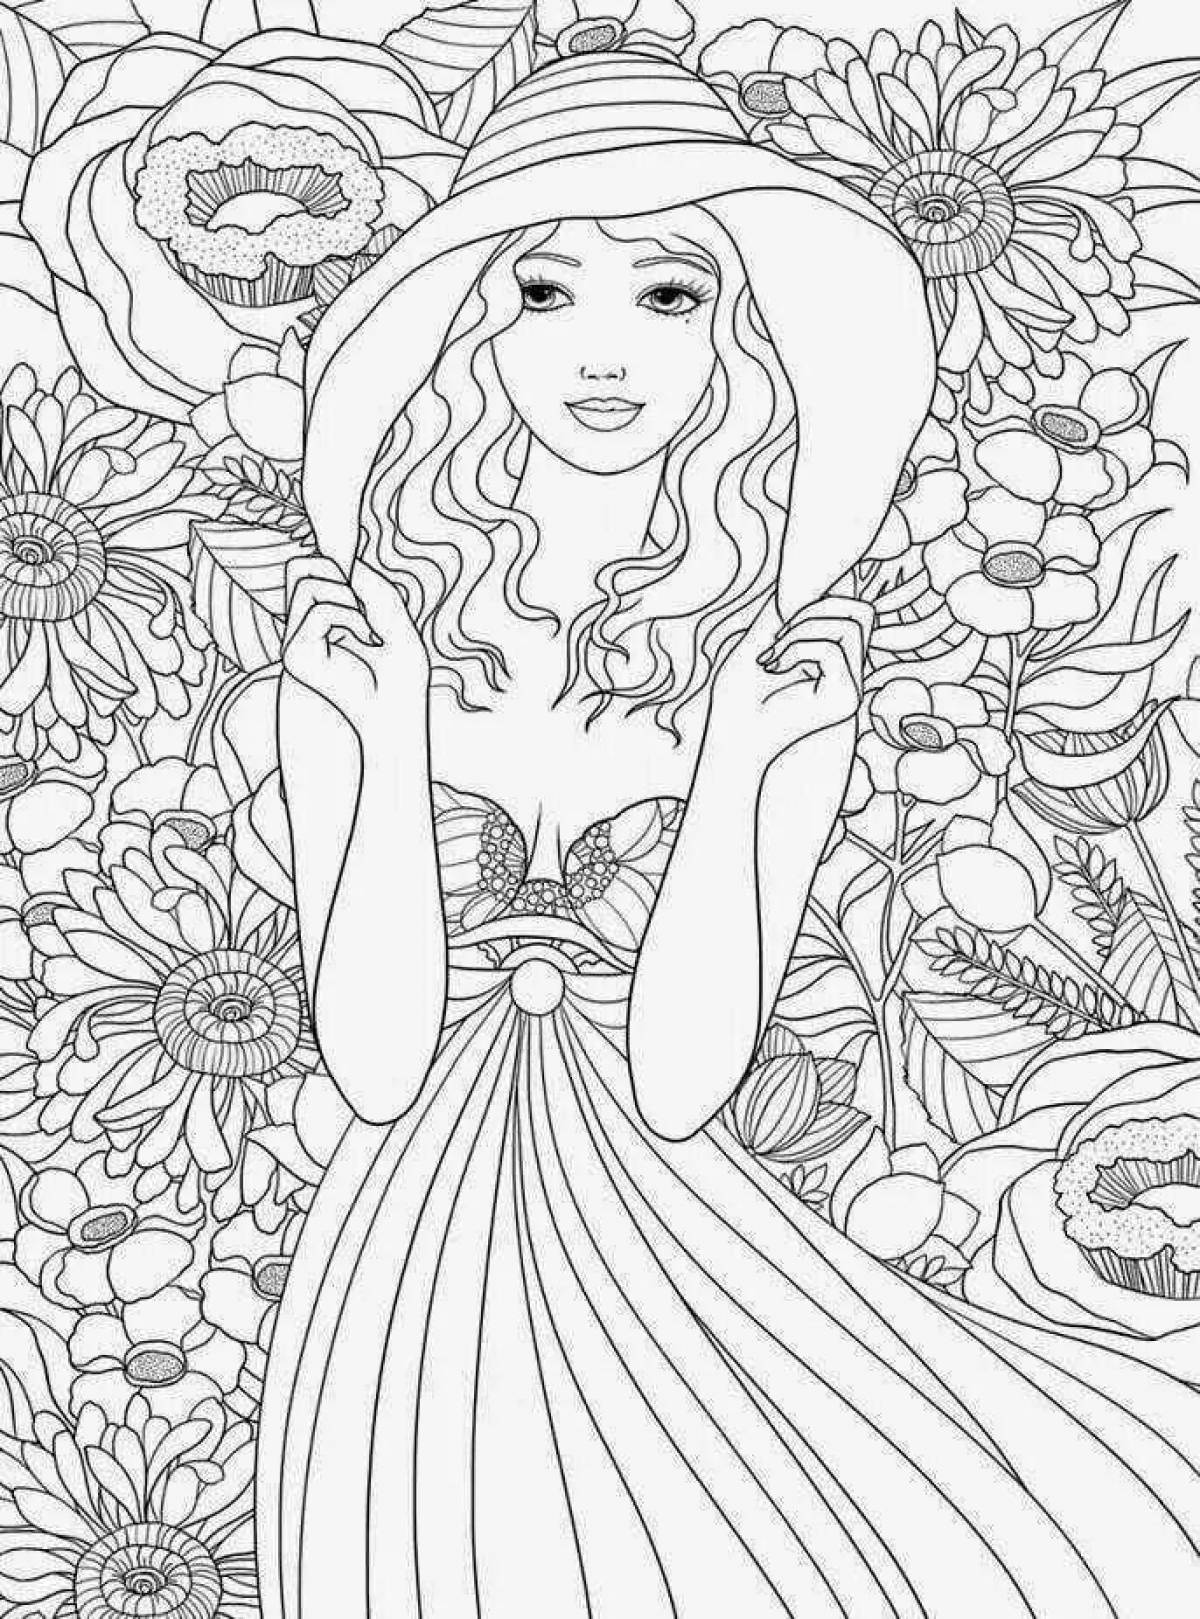 Amazing coloring pages for girls - the best in the world